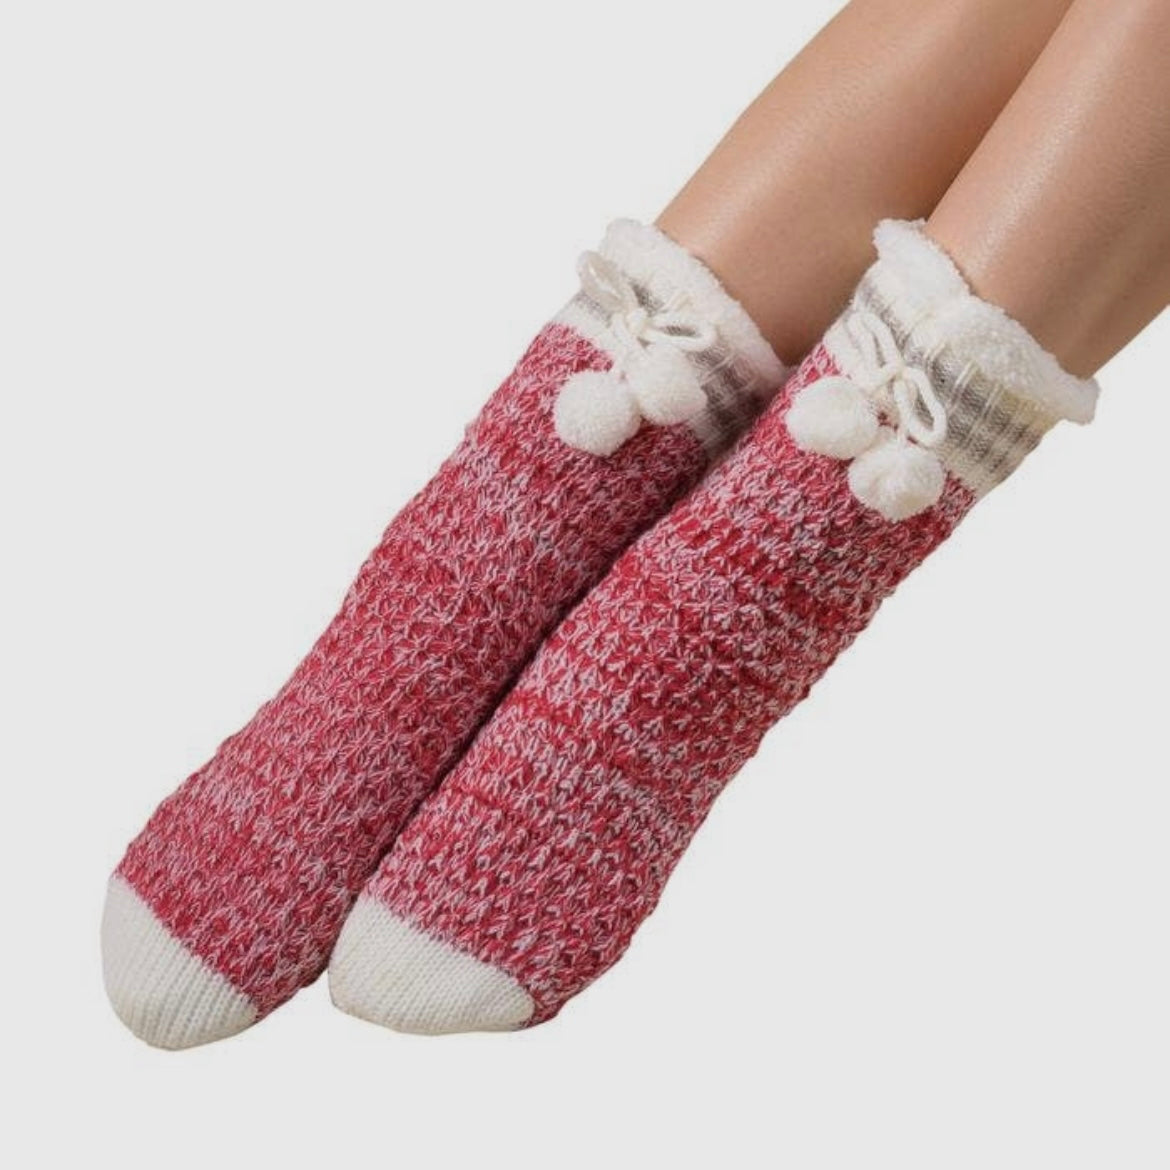 Cozy Textured Cable Knit Lounge Sock